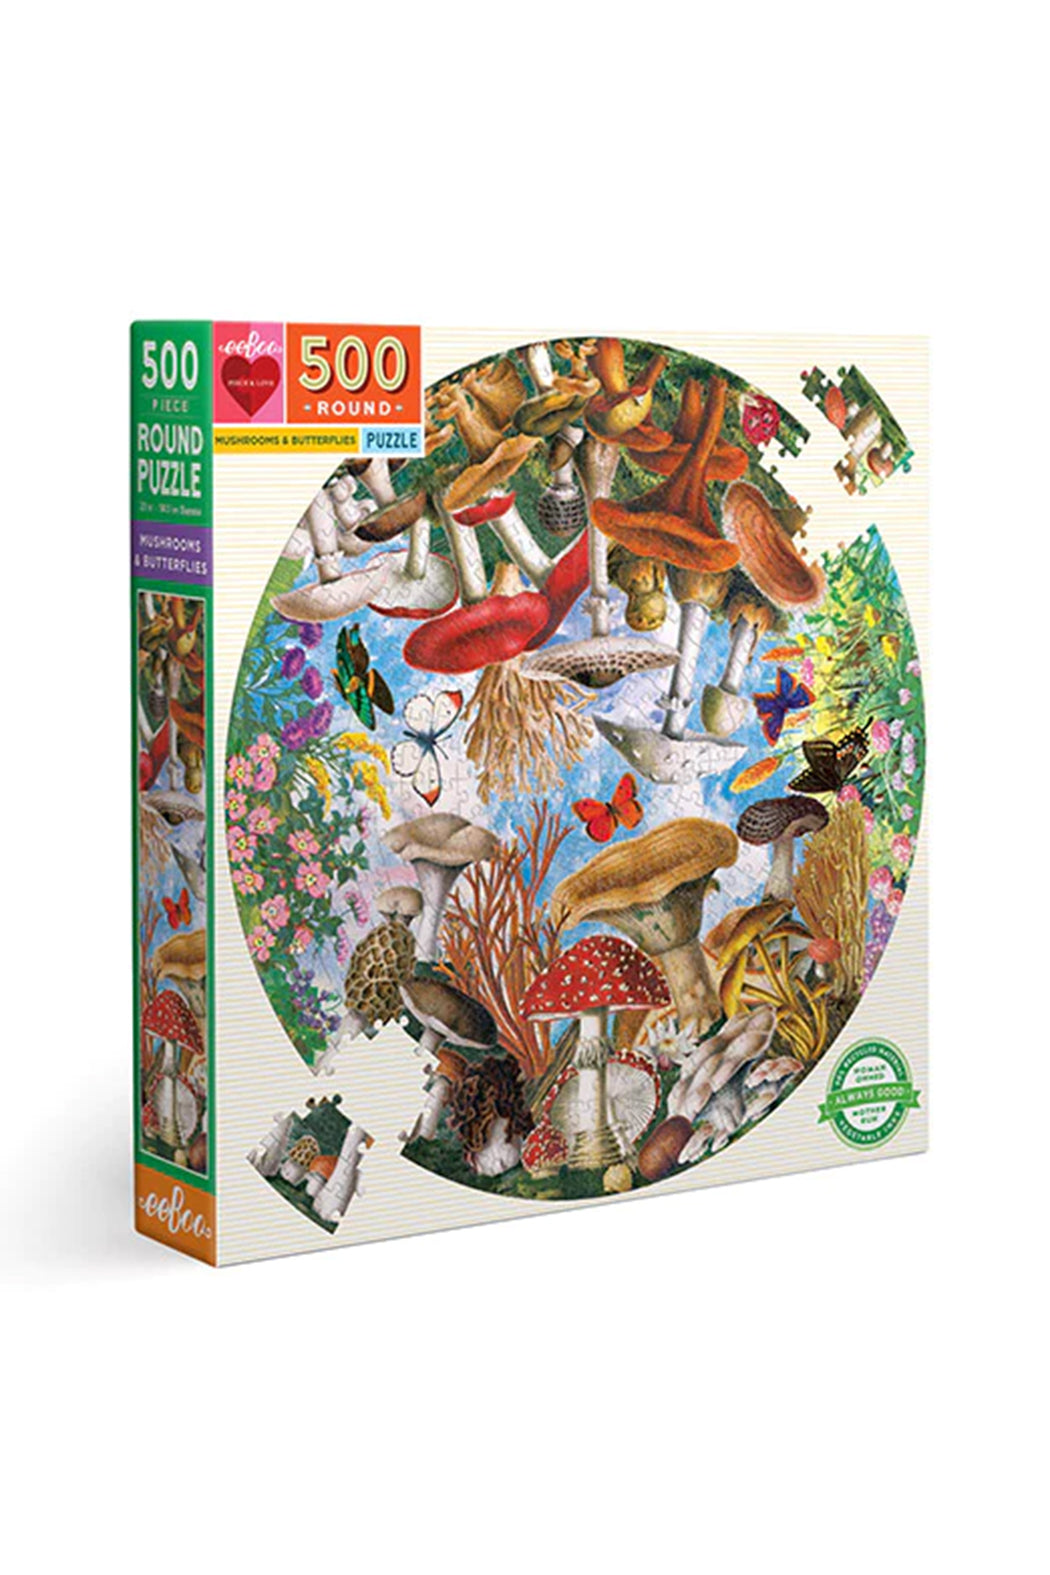 Eeboo Mushrooms and Butterflies 500 Piece Round Puzzle